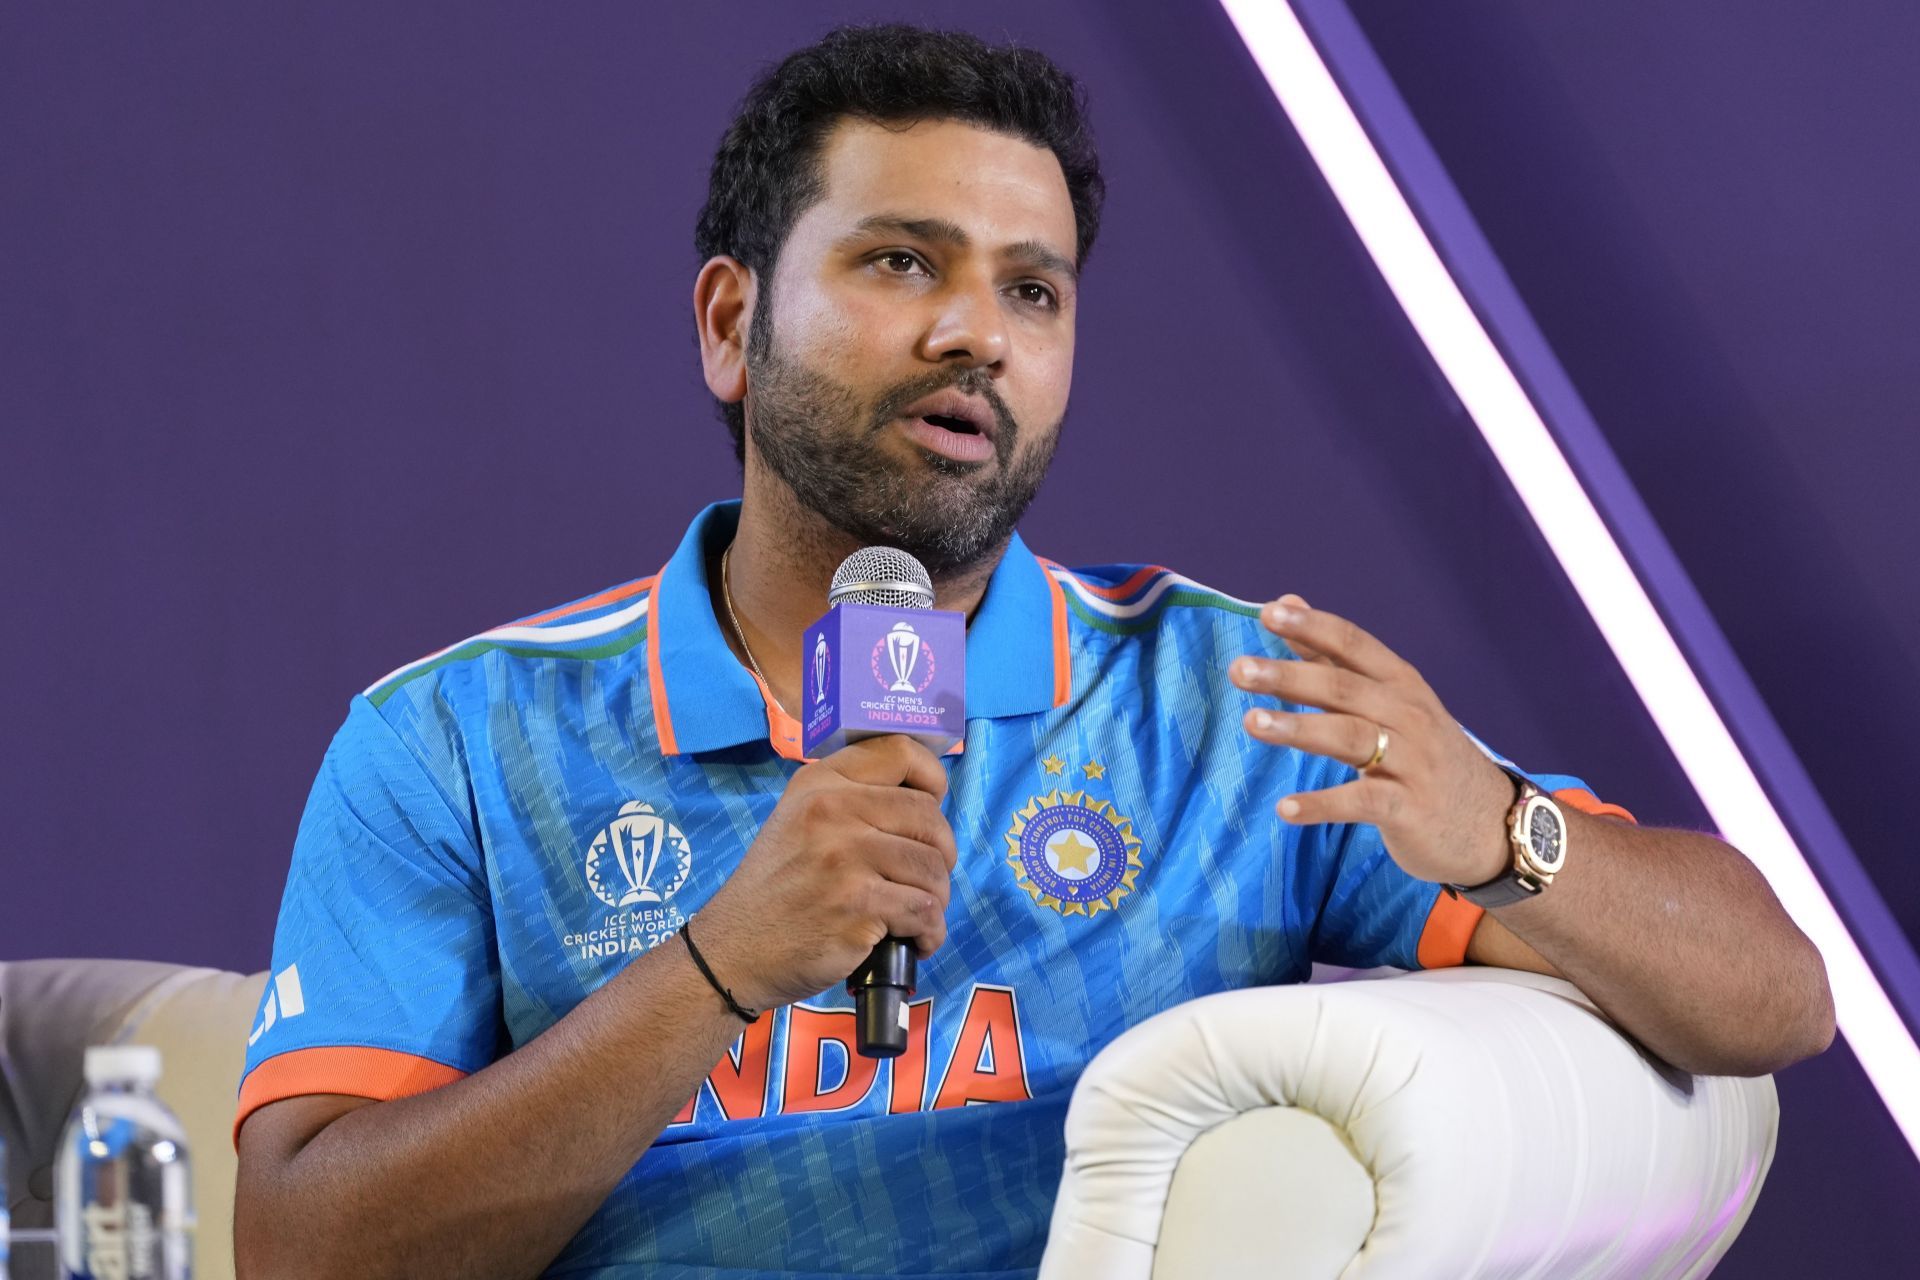 Rohit Sharma will have Matt Henry and Trent Boult to negotiate in the powerplay